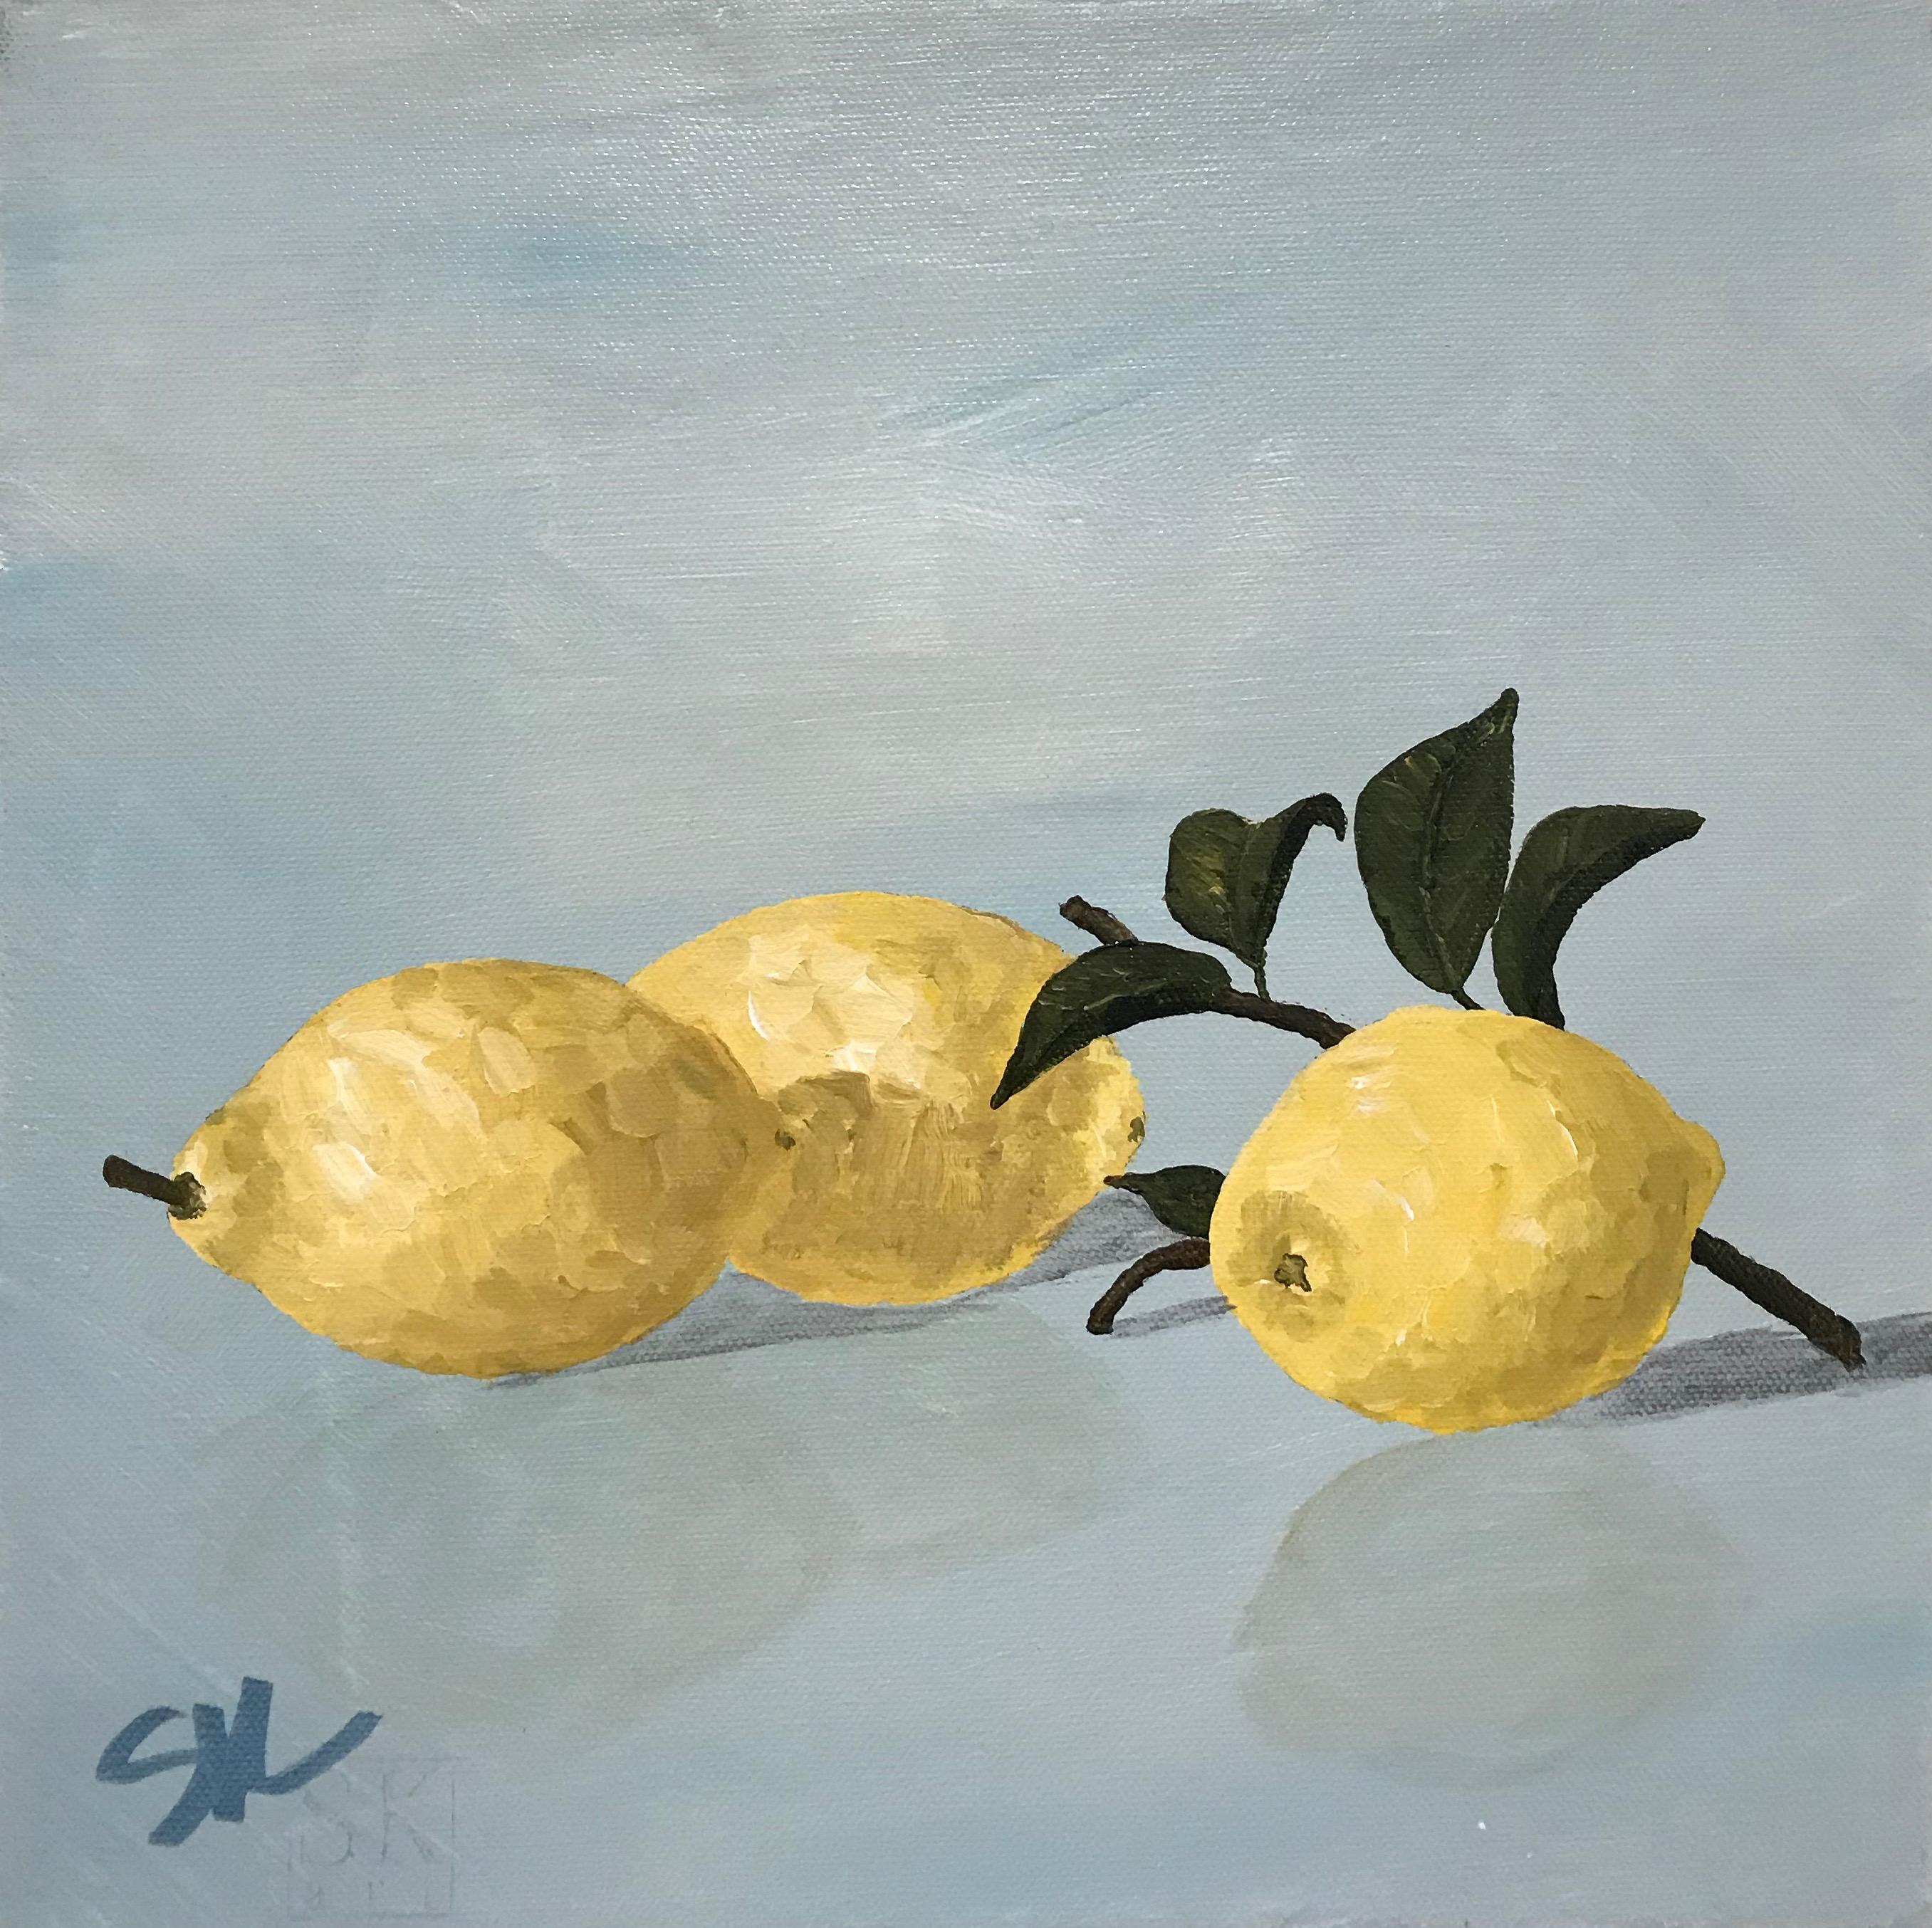 Susan Kinsella Landscape Painting – Lemons II, Small Square Contemporary Still Life on Canvas